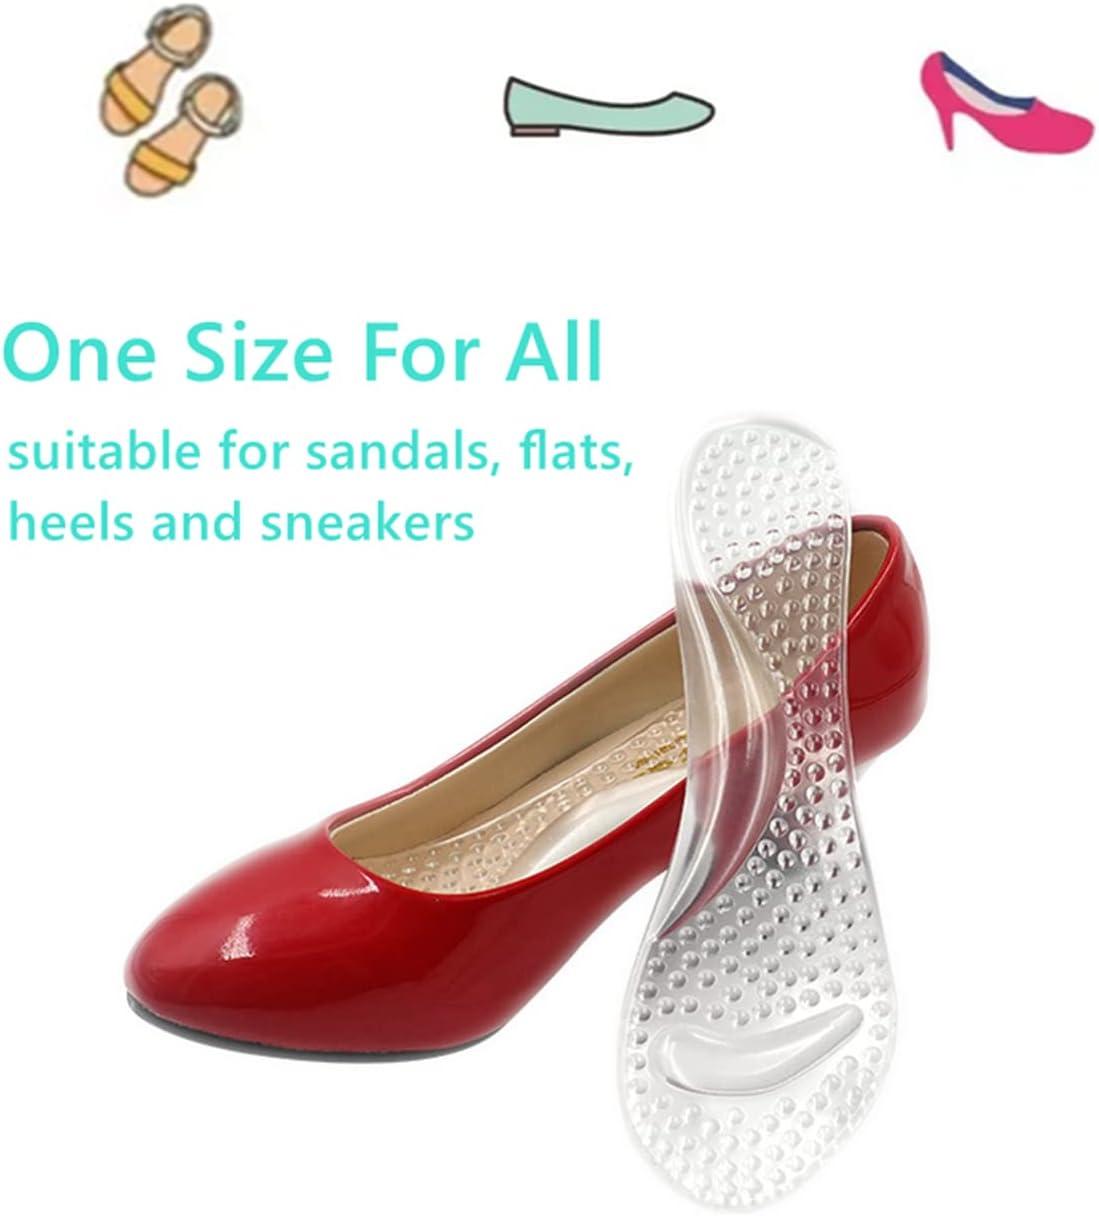 High heel inserts, best inserts for heels, temporary or permanent inserts -  Killer Heels Comfort